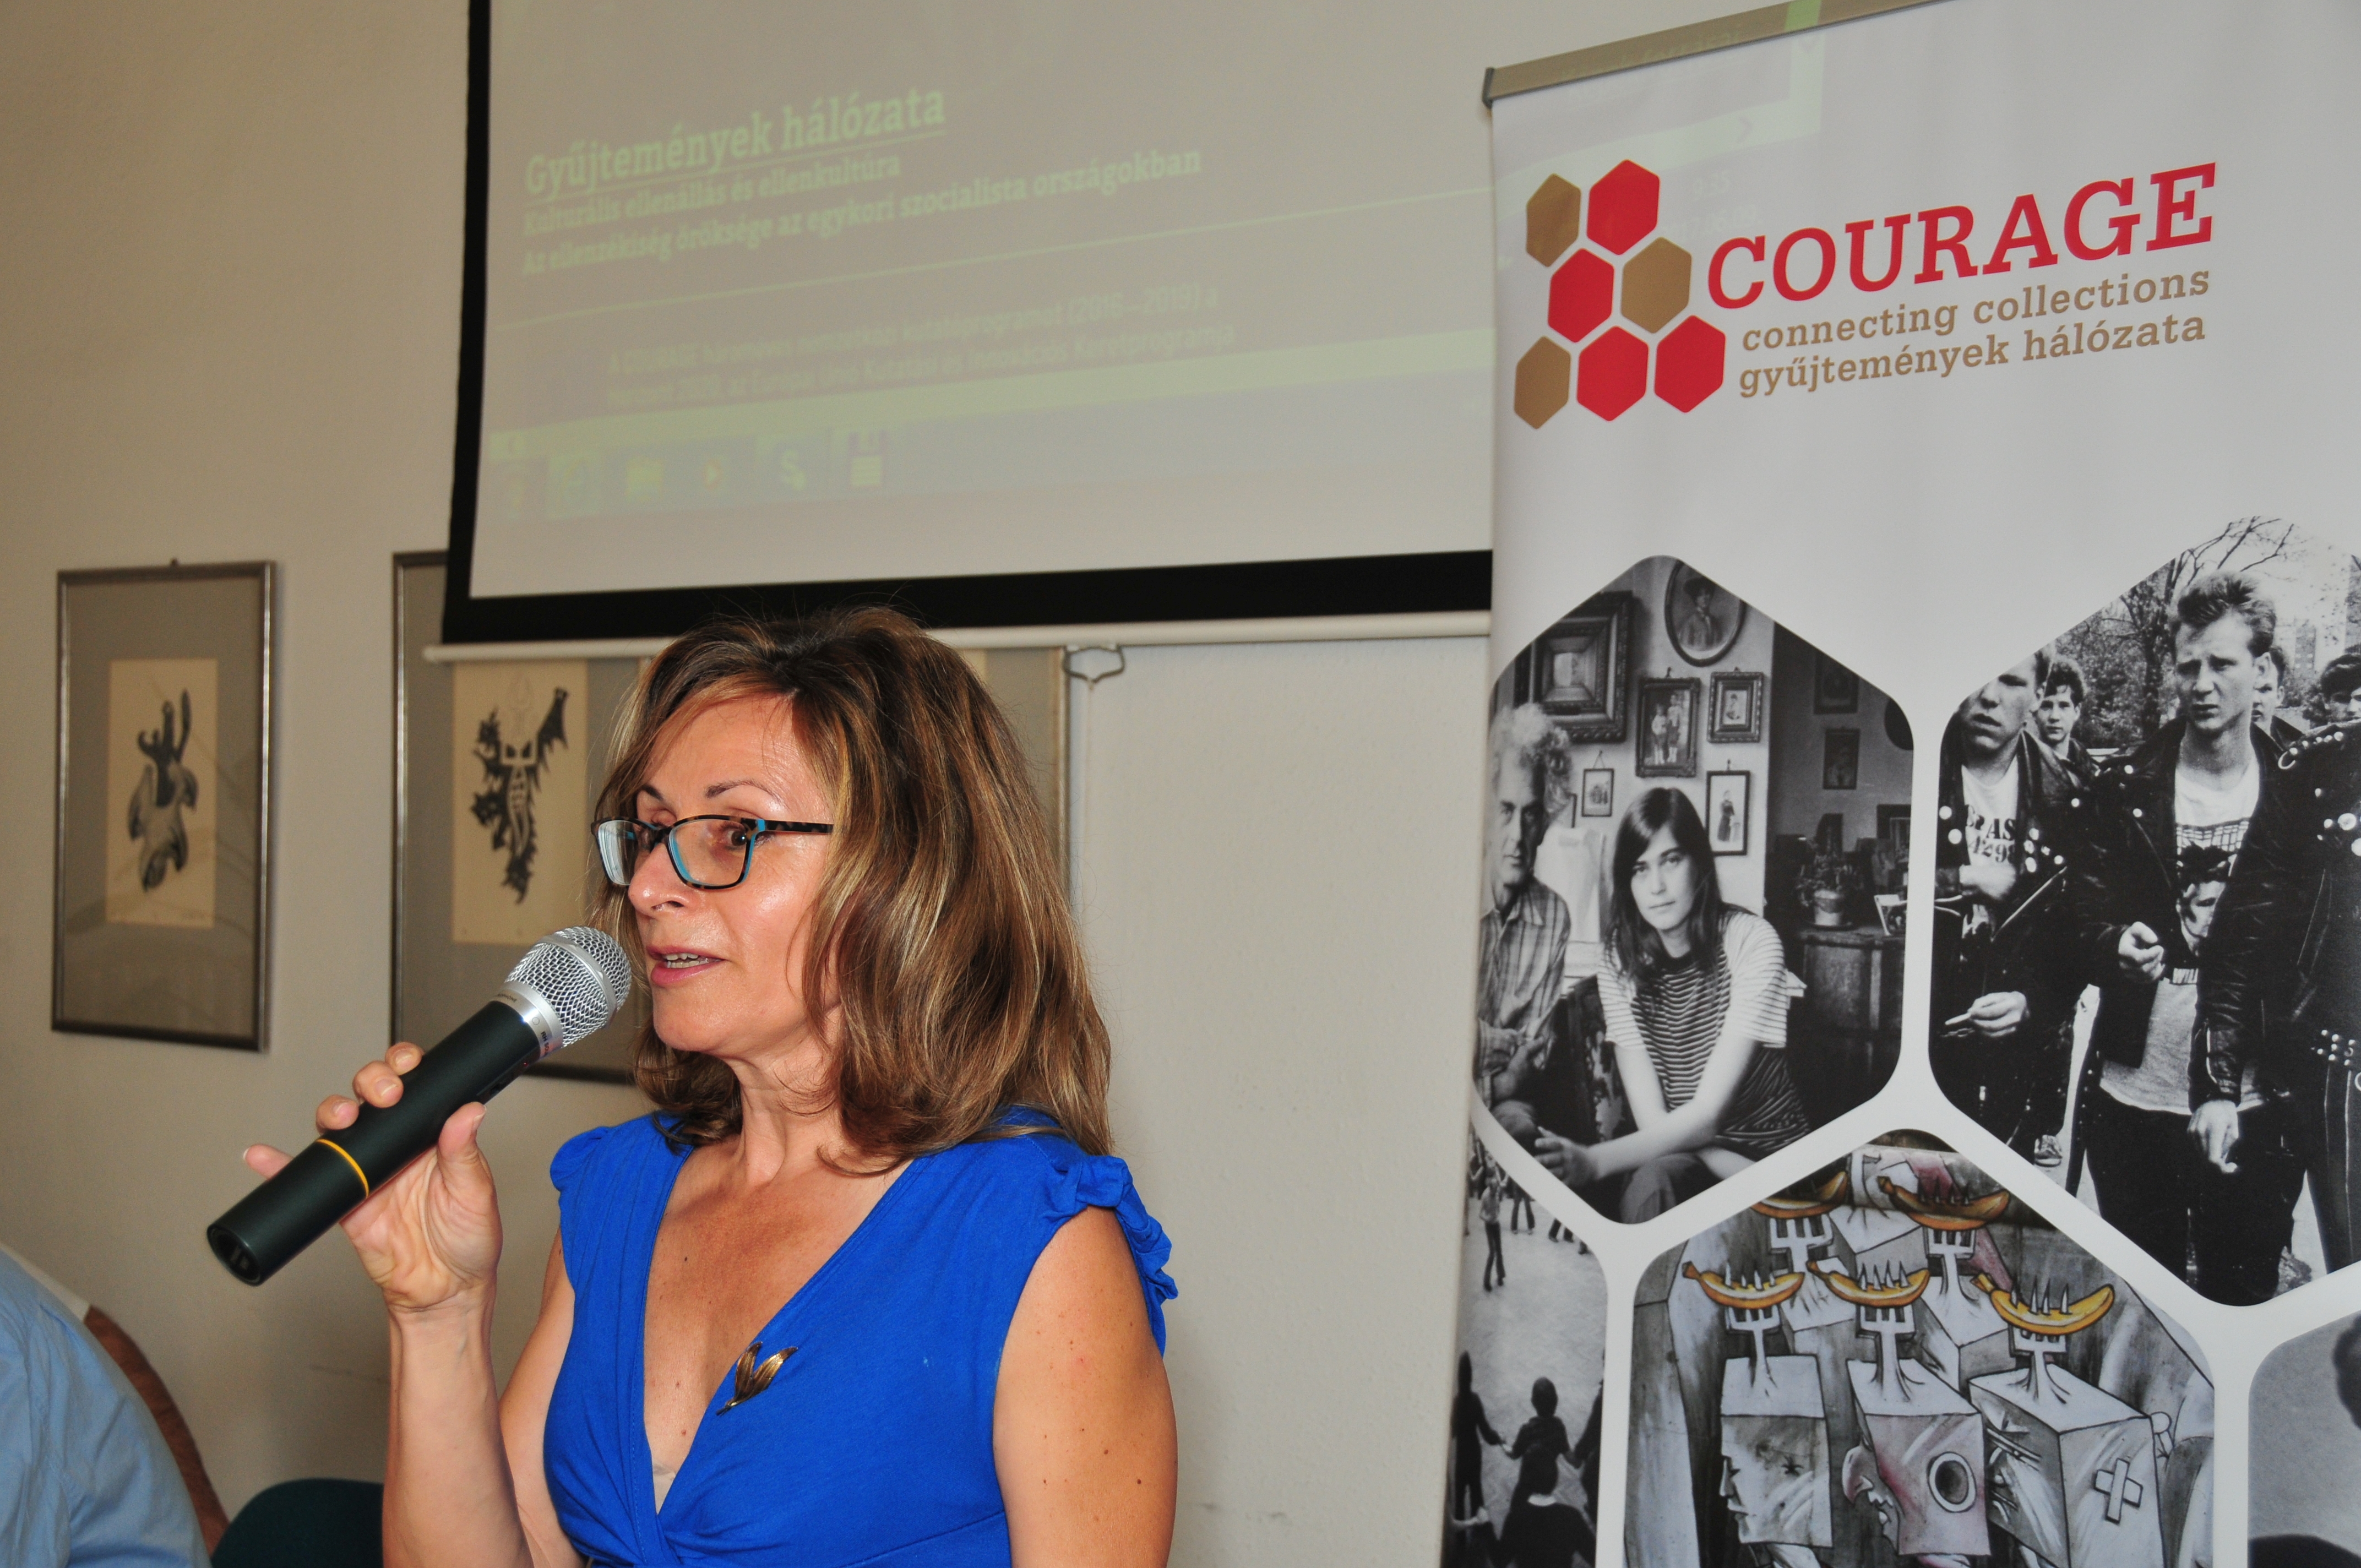 Katalin Somlai at the Oral History Conference of COURAGE in June 2017.